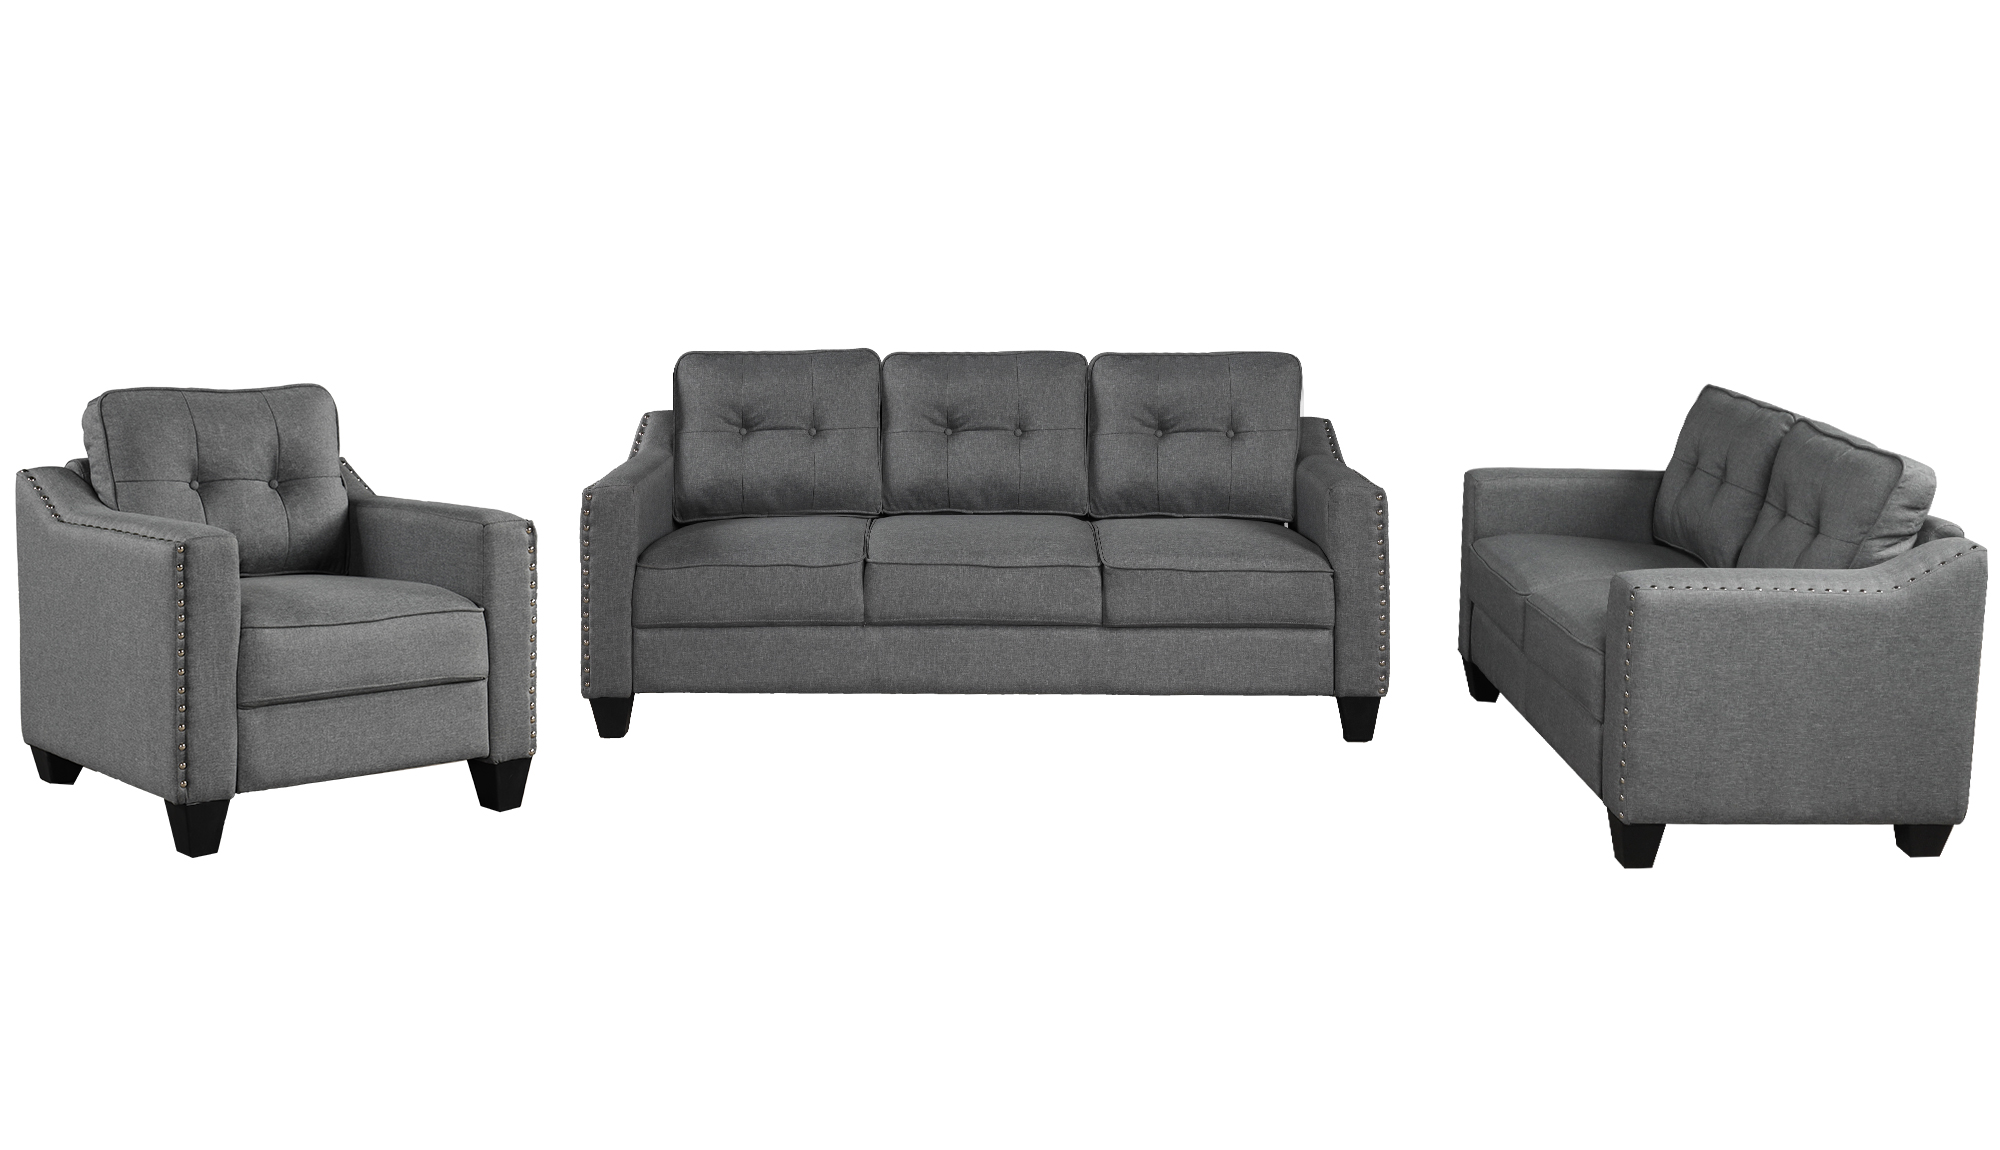 3 Piece Living Room Set With Tufted Cushions